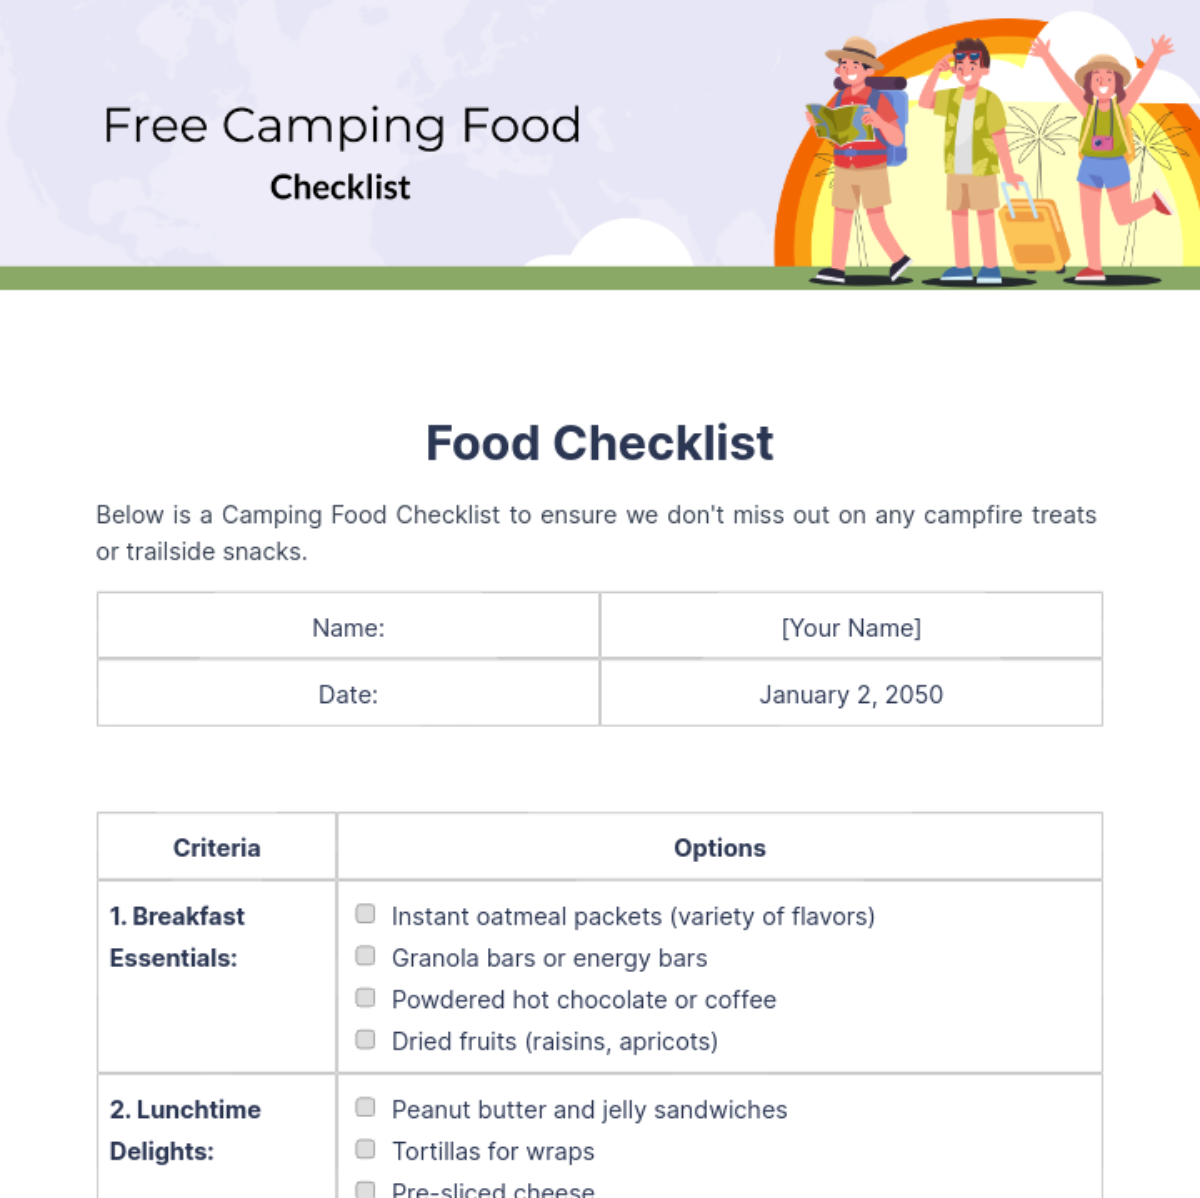 Free Camping Food Checklist Template